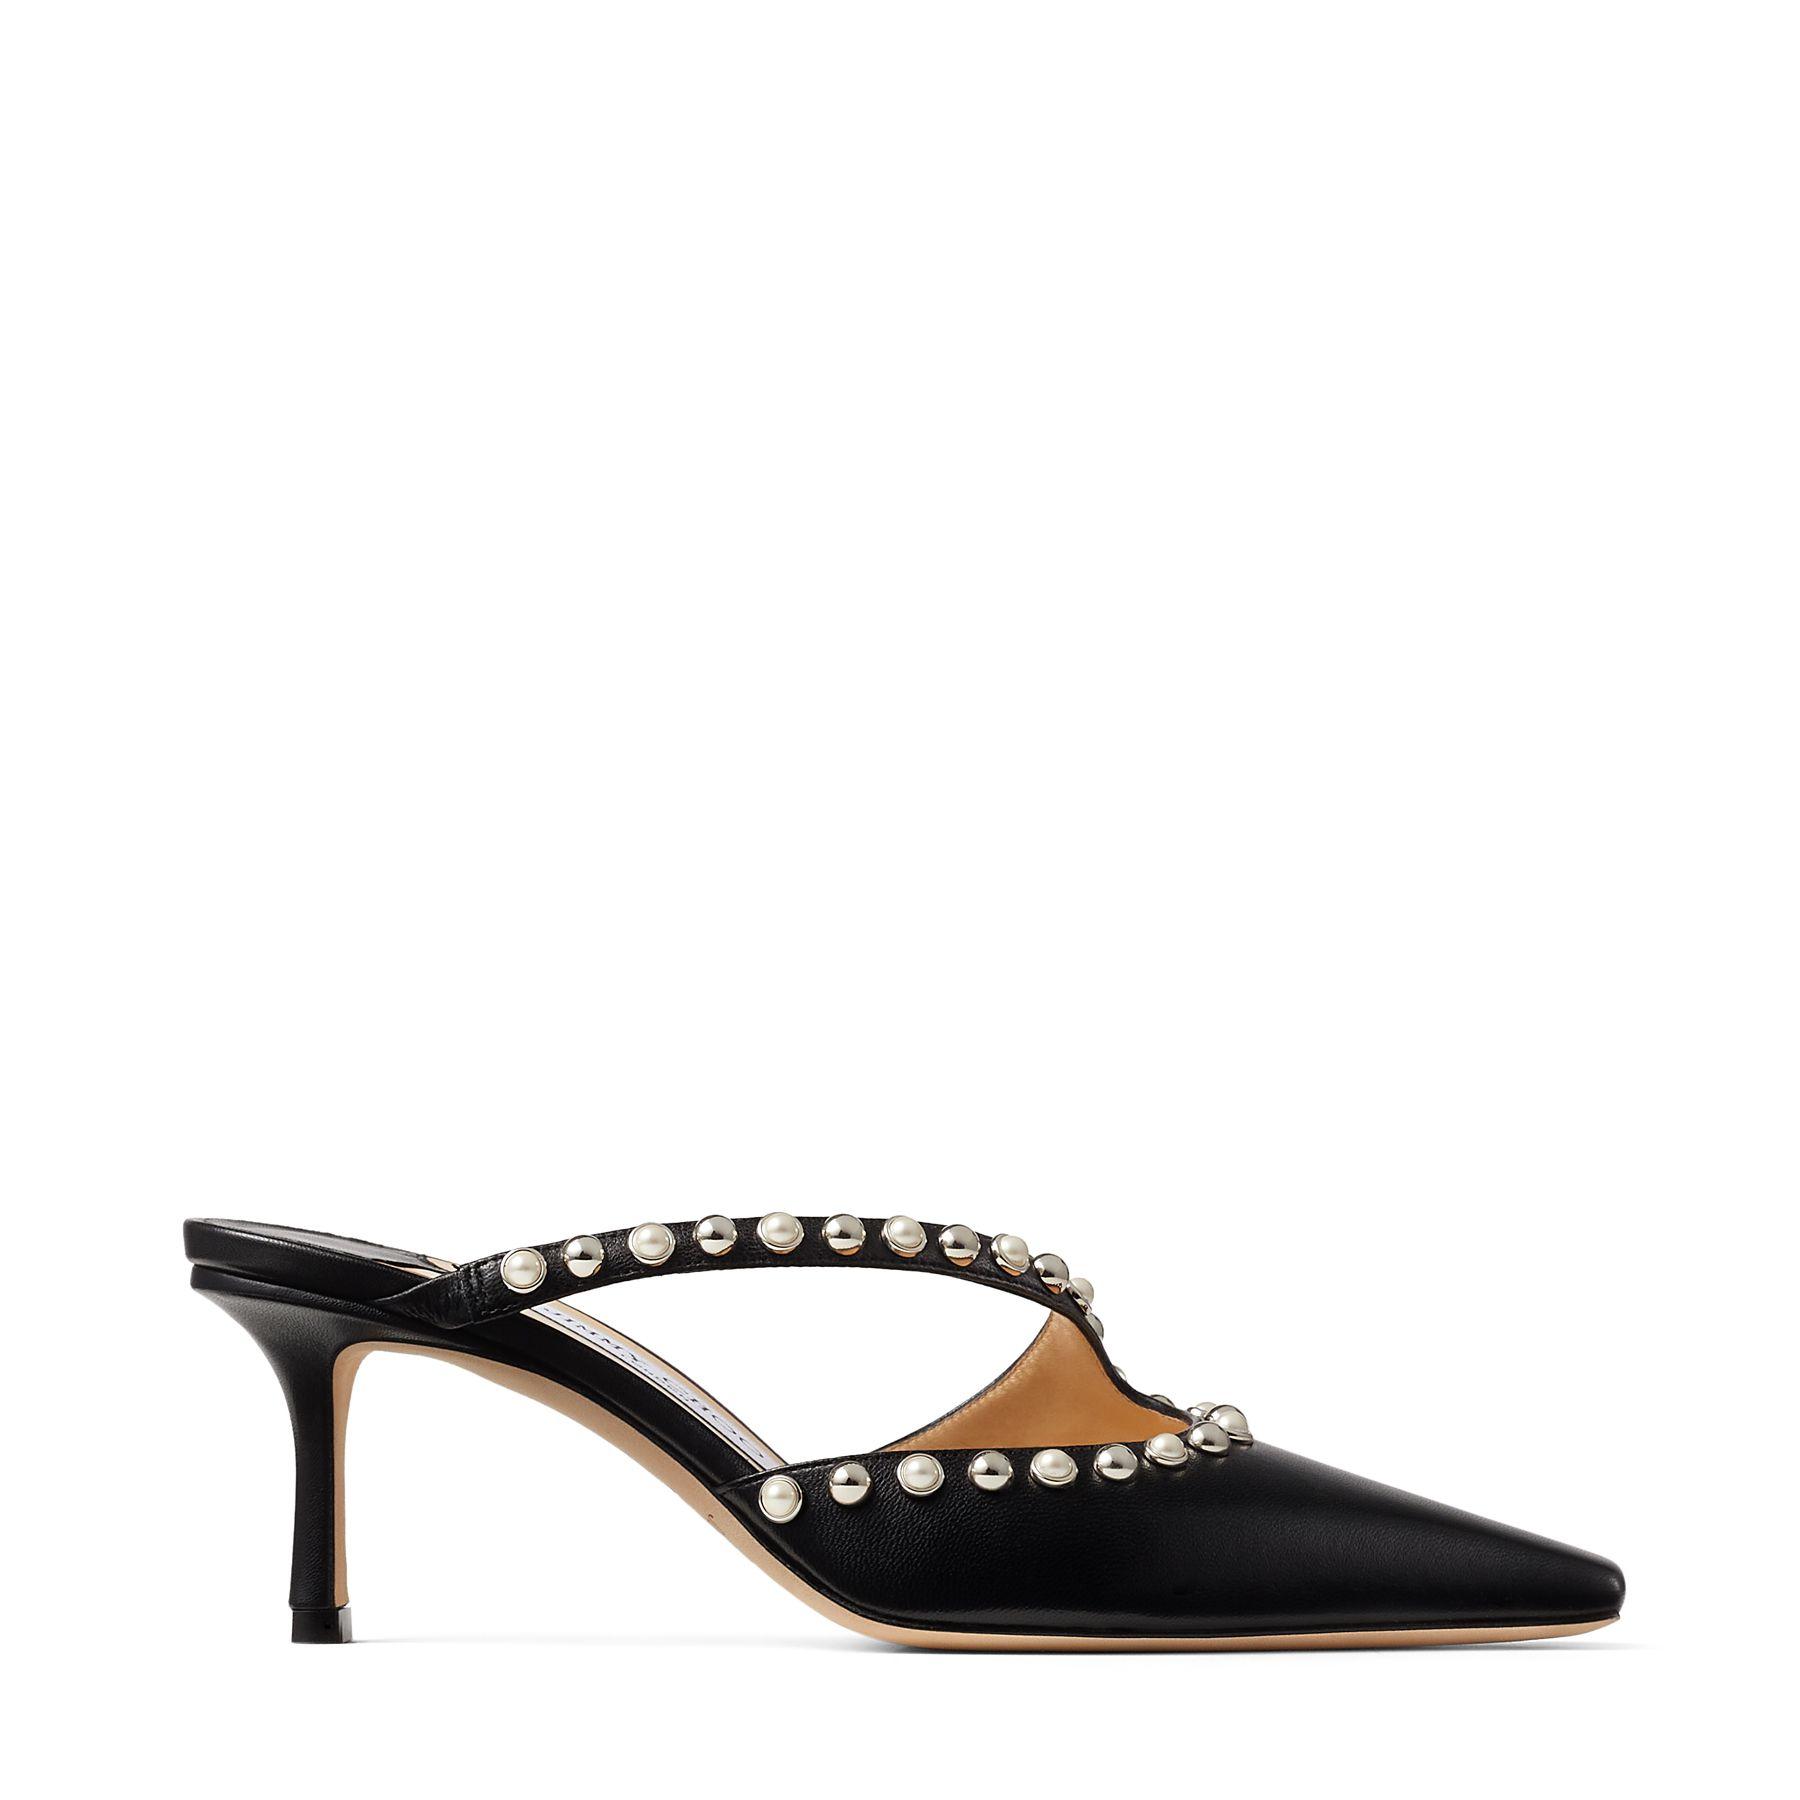 Jimmy Choo Ros 65 Black Nappa Leather Mules With Silver Dome Studs 